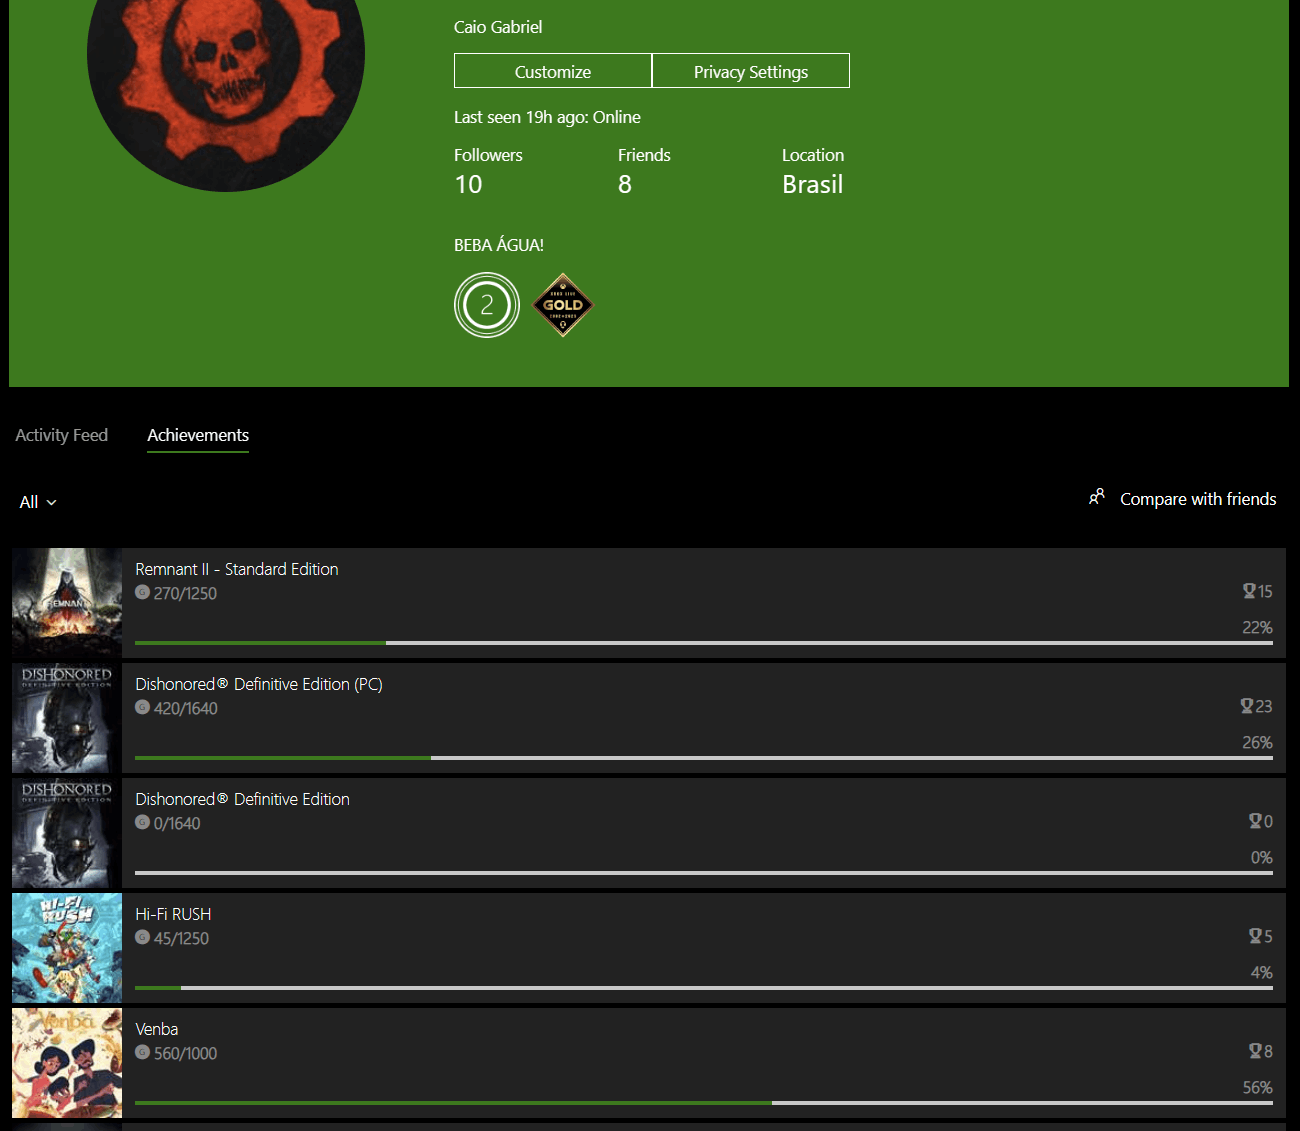 My Xbox Year in Review does not show all the games i have played this year [​IMG]